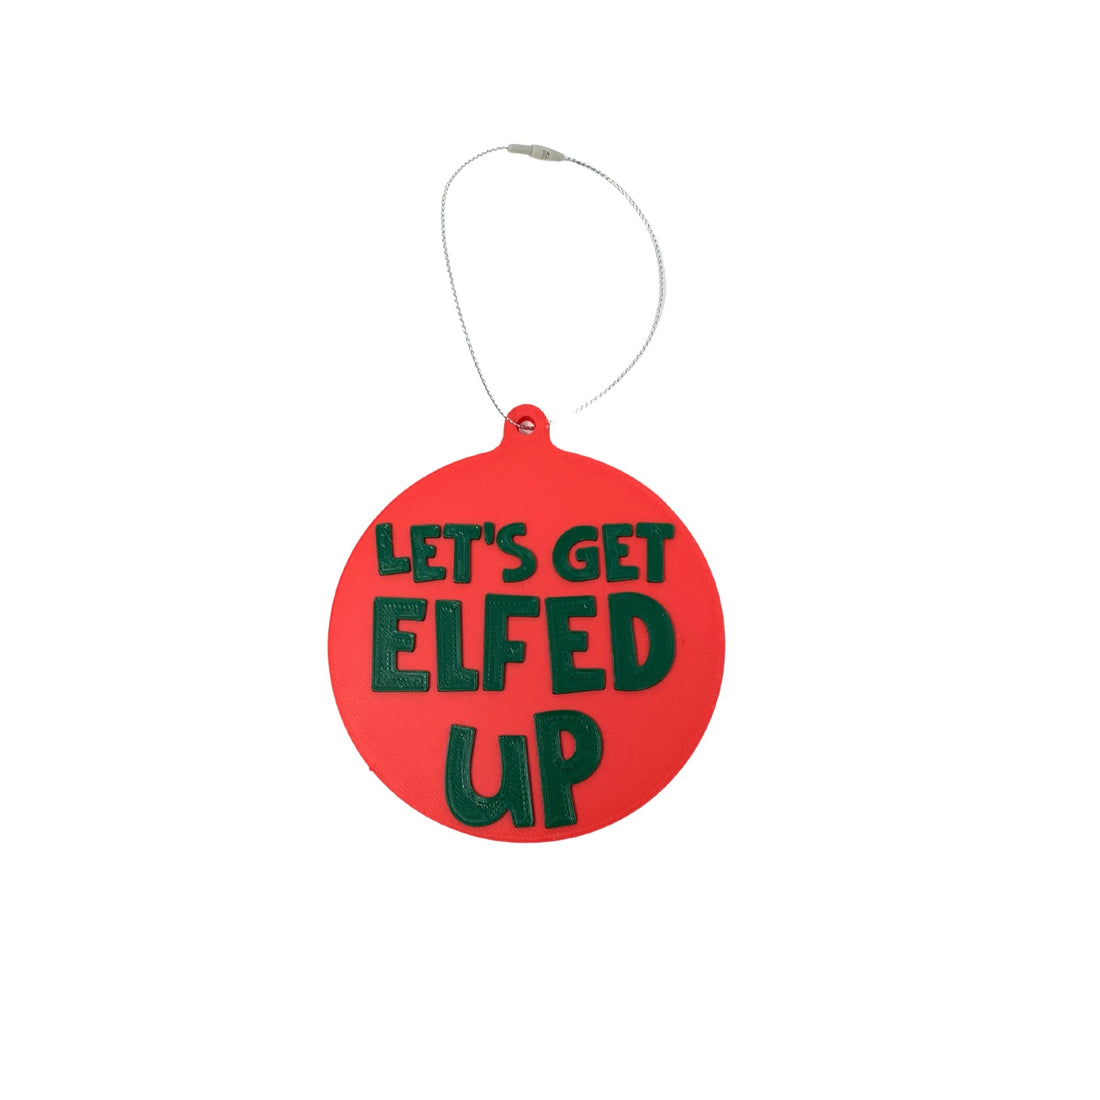 FRESHe Lets Get Elfed Up Funny Christmas Ornament - Perfect Funny Christmas Gift or Stocking Stuffer - Decorative Holiday Ornament - Made in The USA!